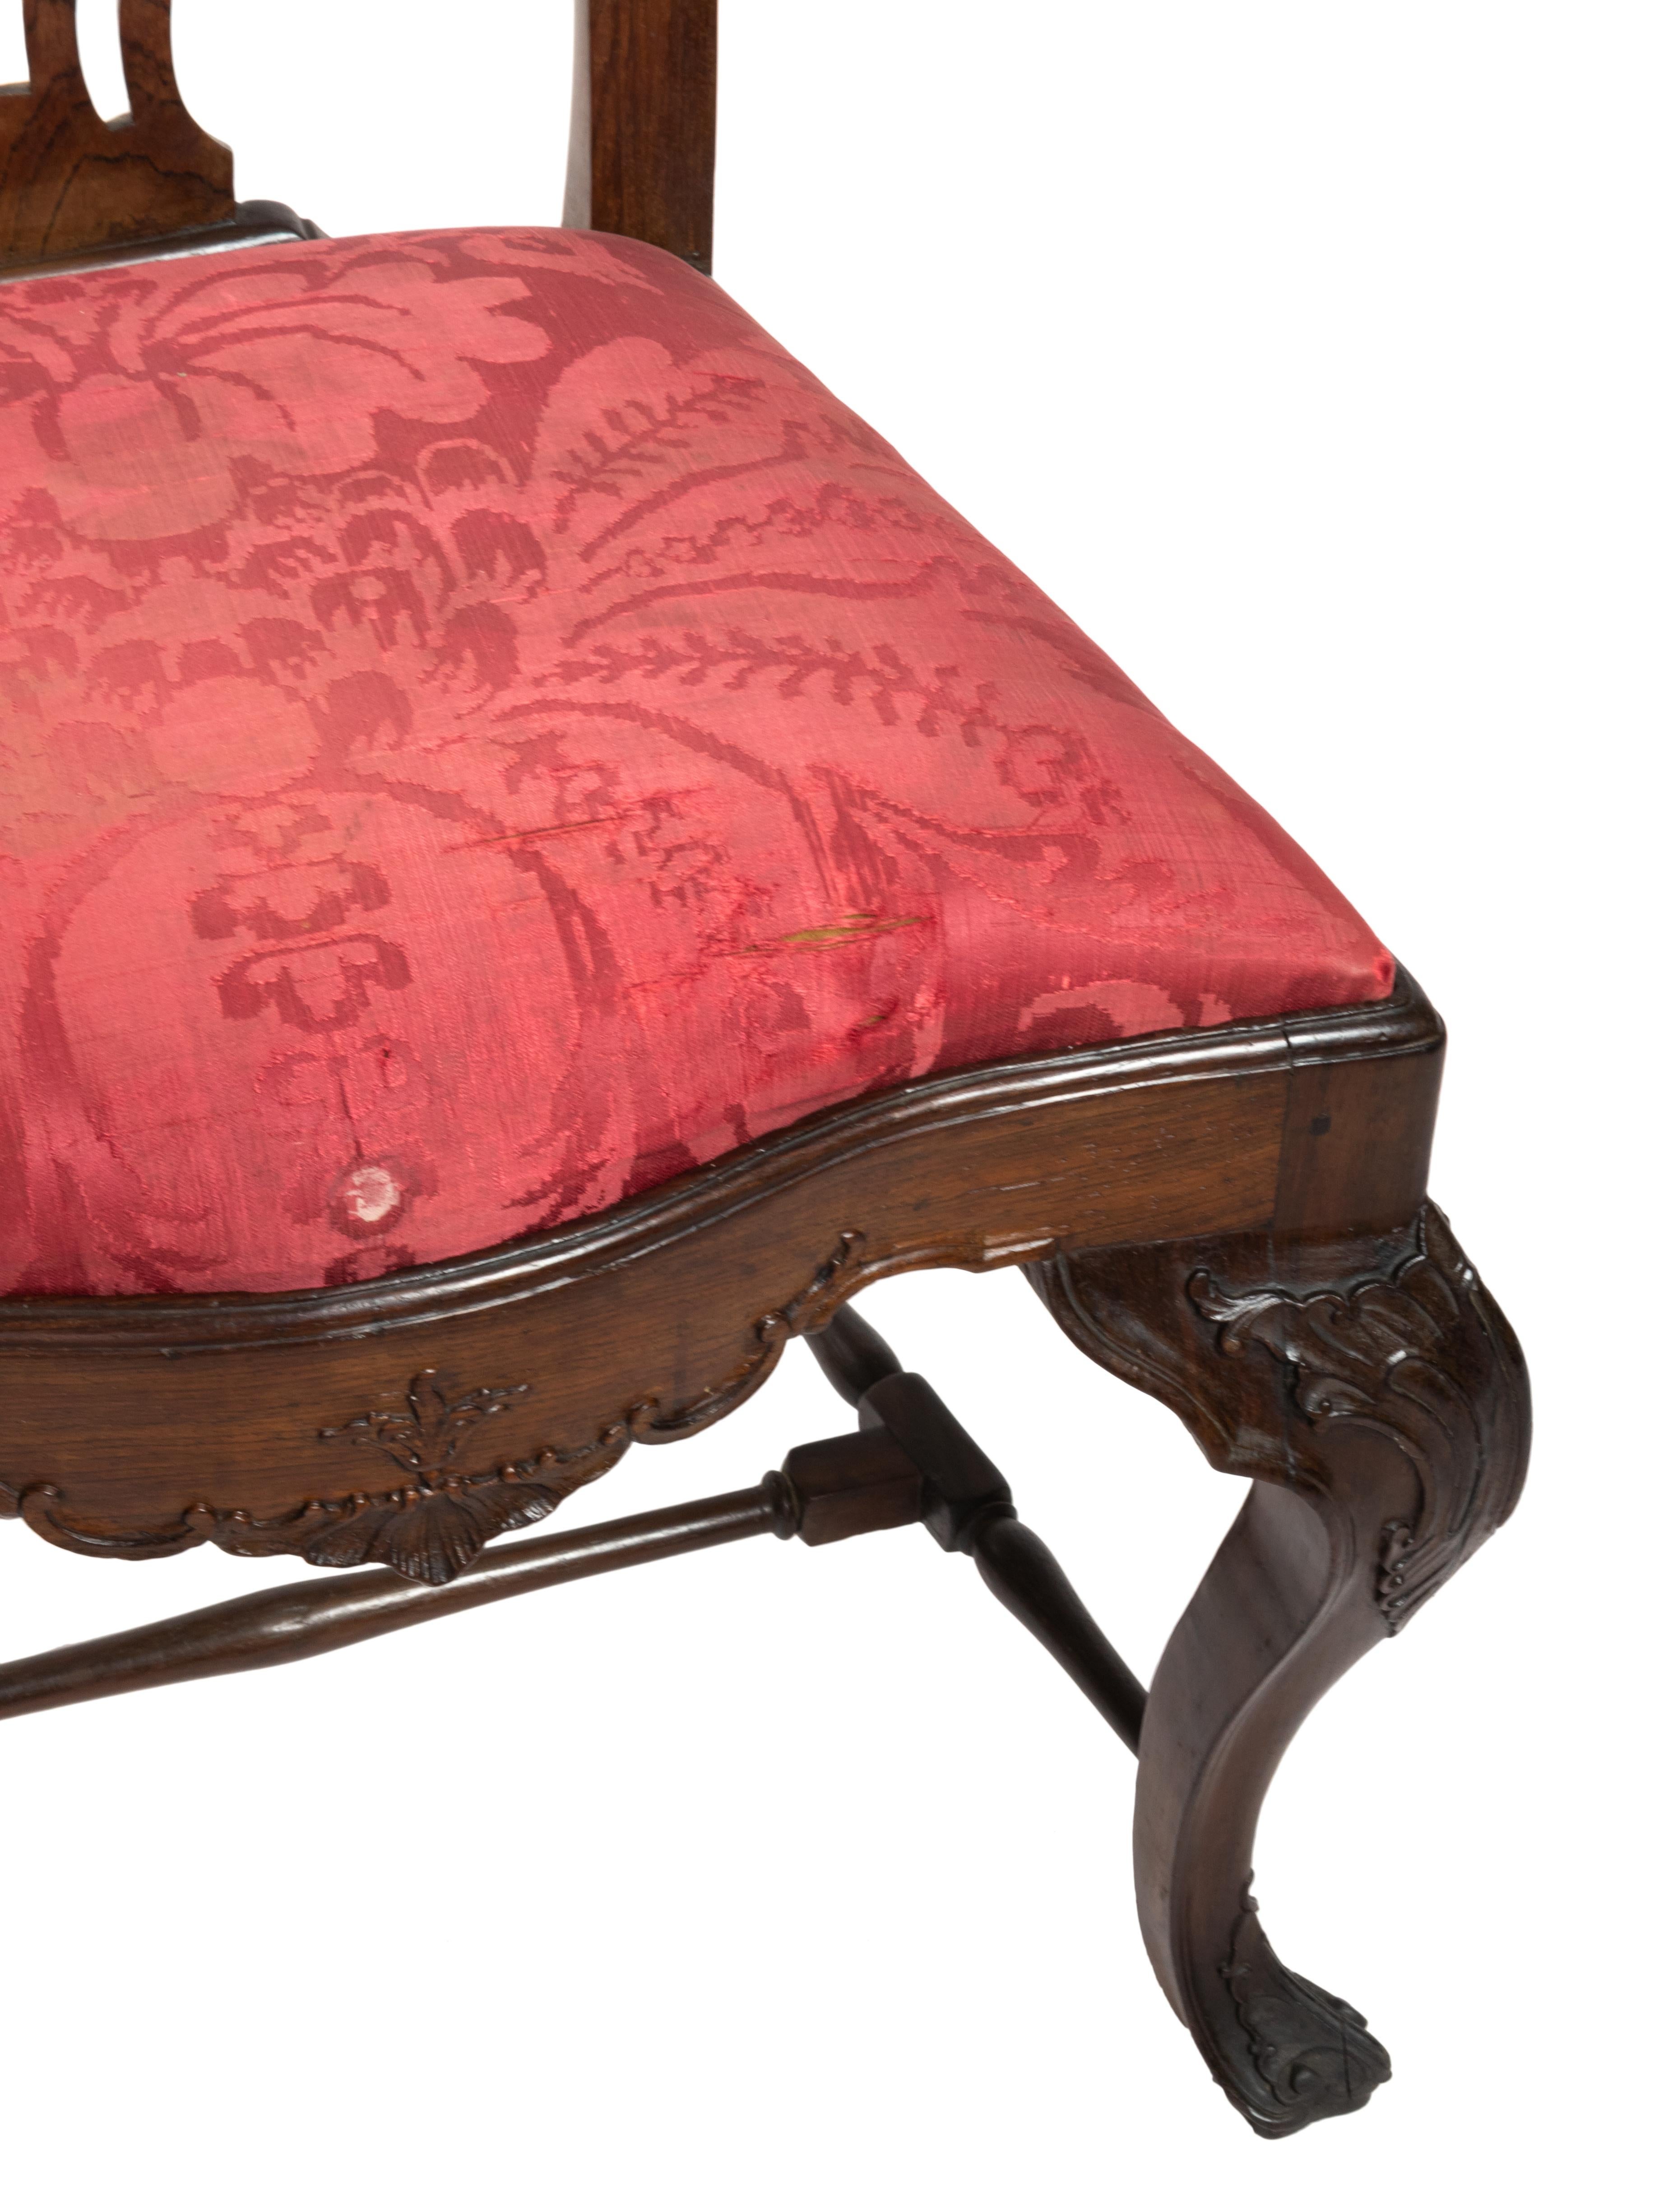 Baroque Red Damask Portuguese Chair, 18th Century For Sale 7